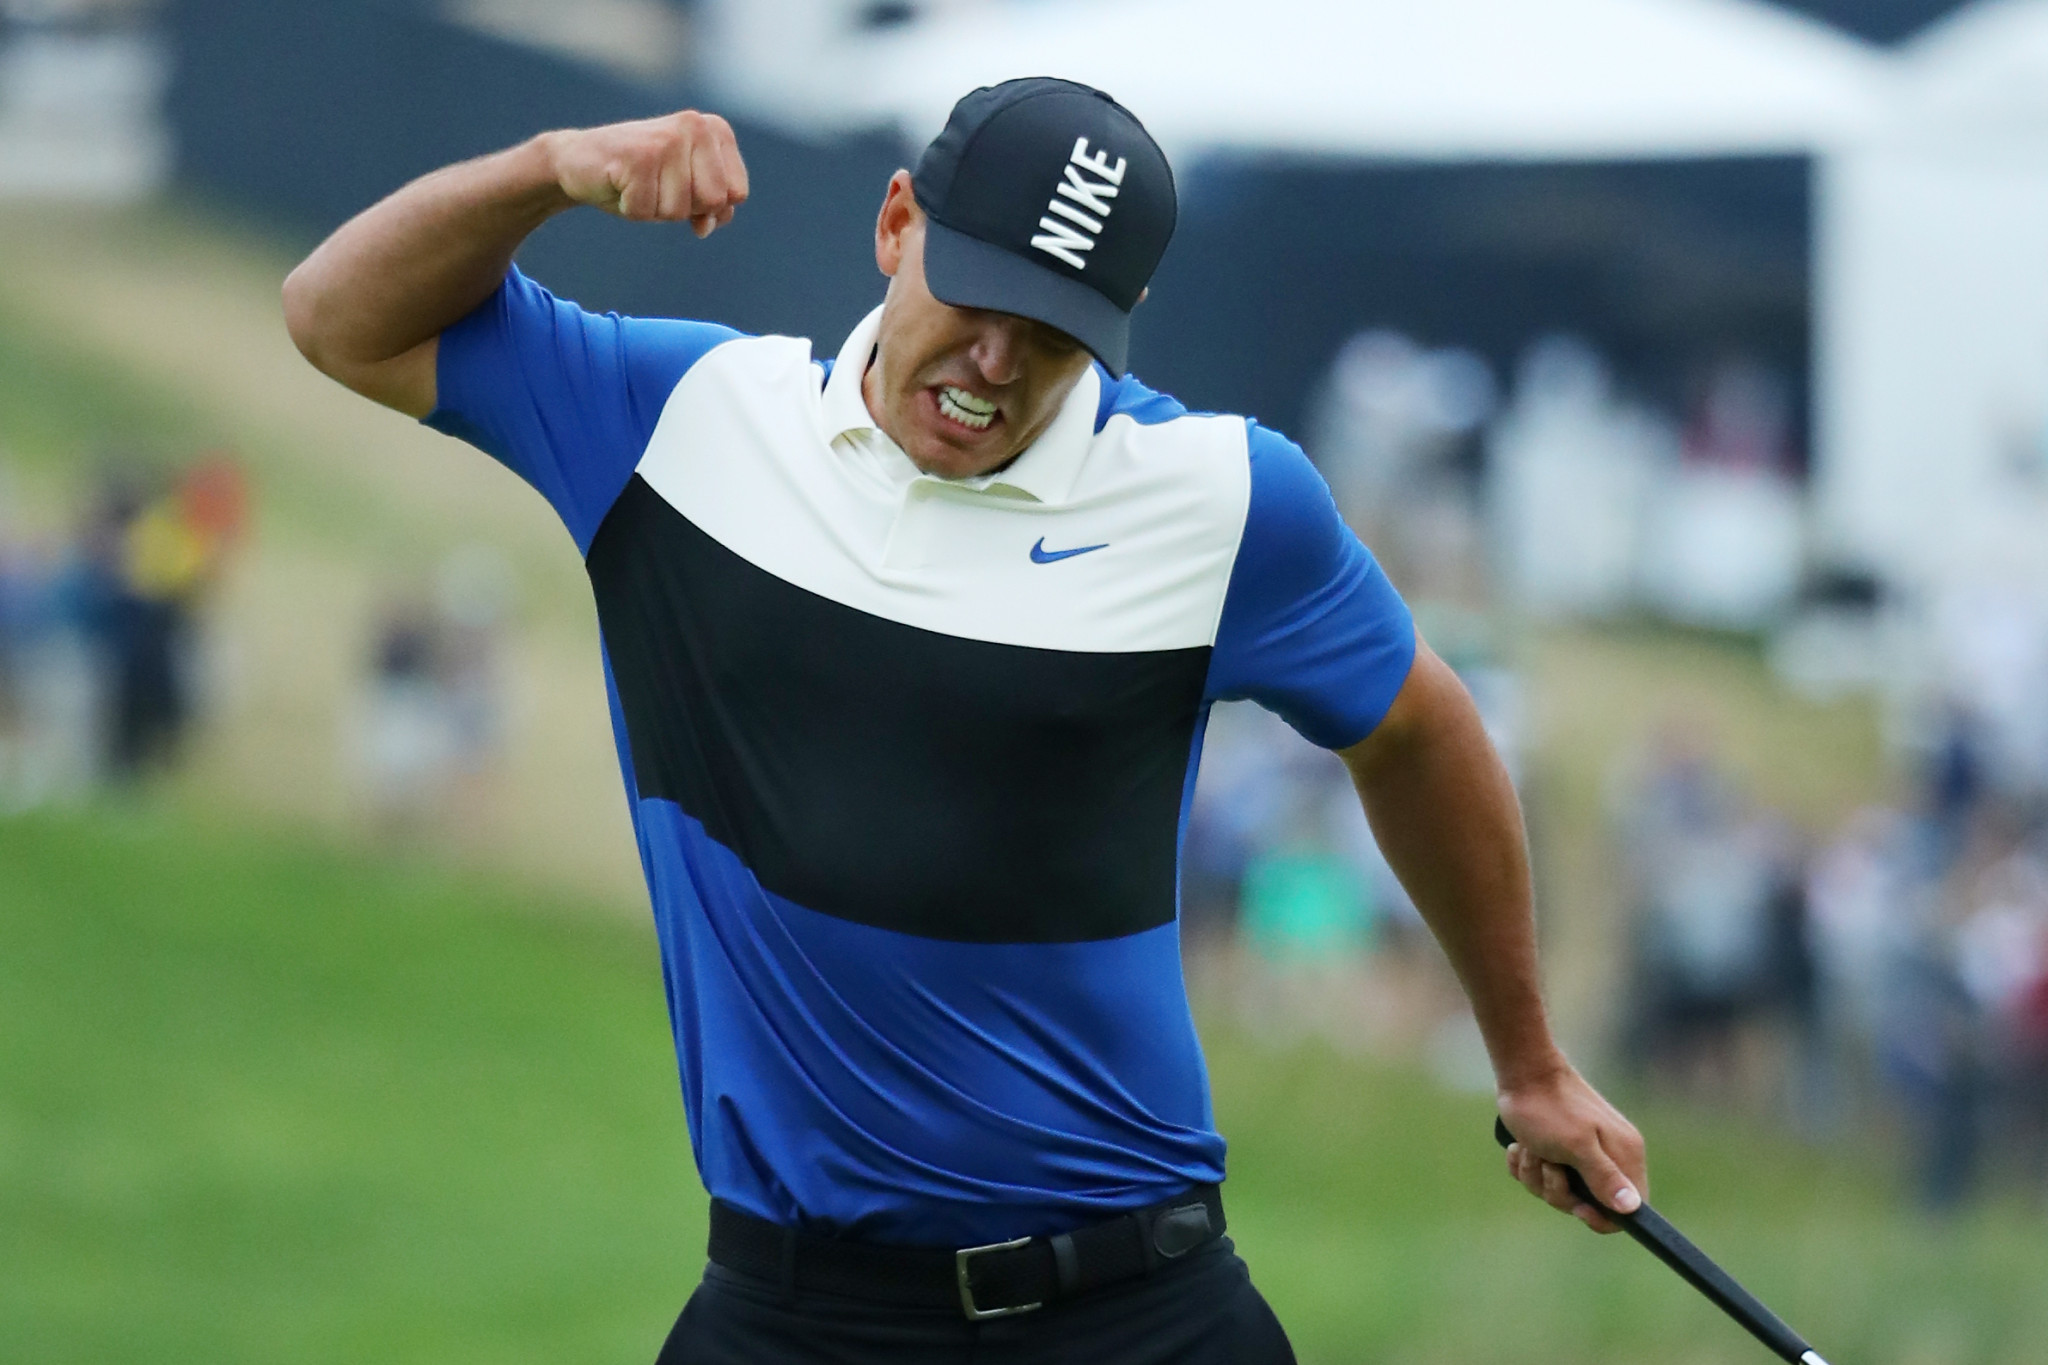 Brooks Koepka hung on to successfully defend his US PGA title ©Getty Images